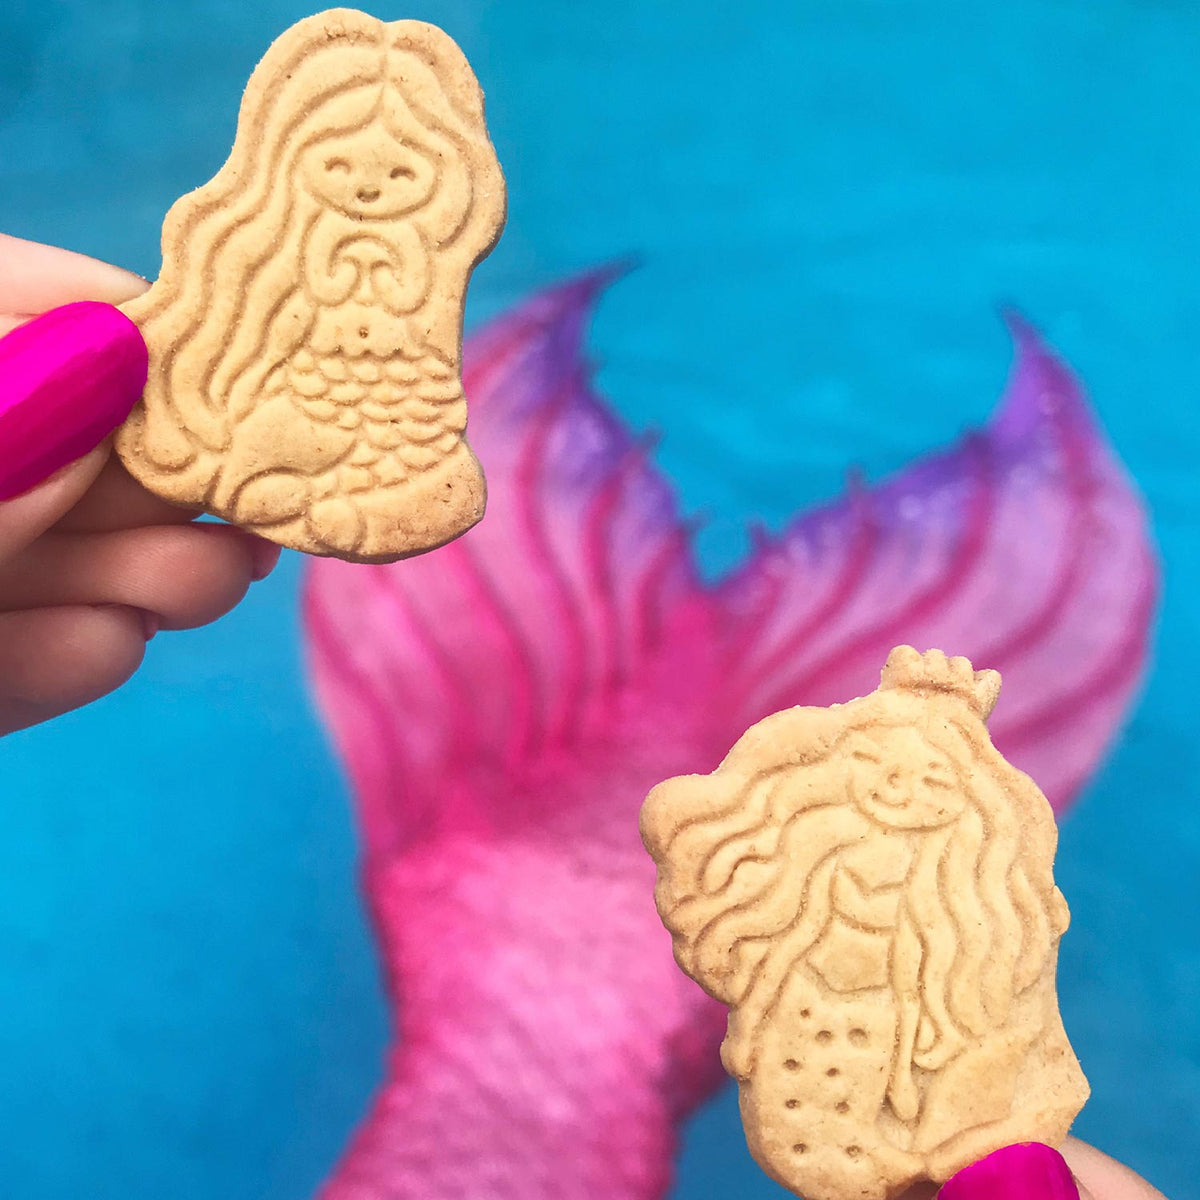 Magical Animal Crackers Snack Packs